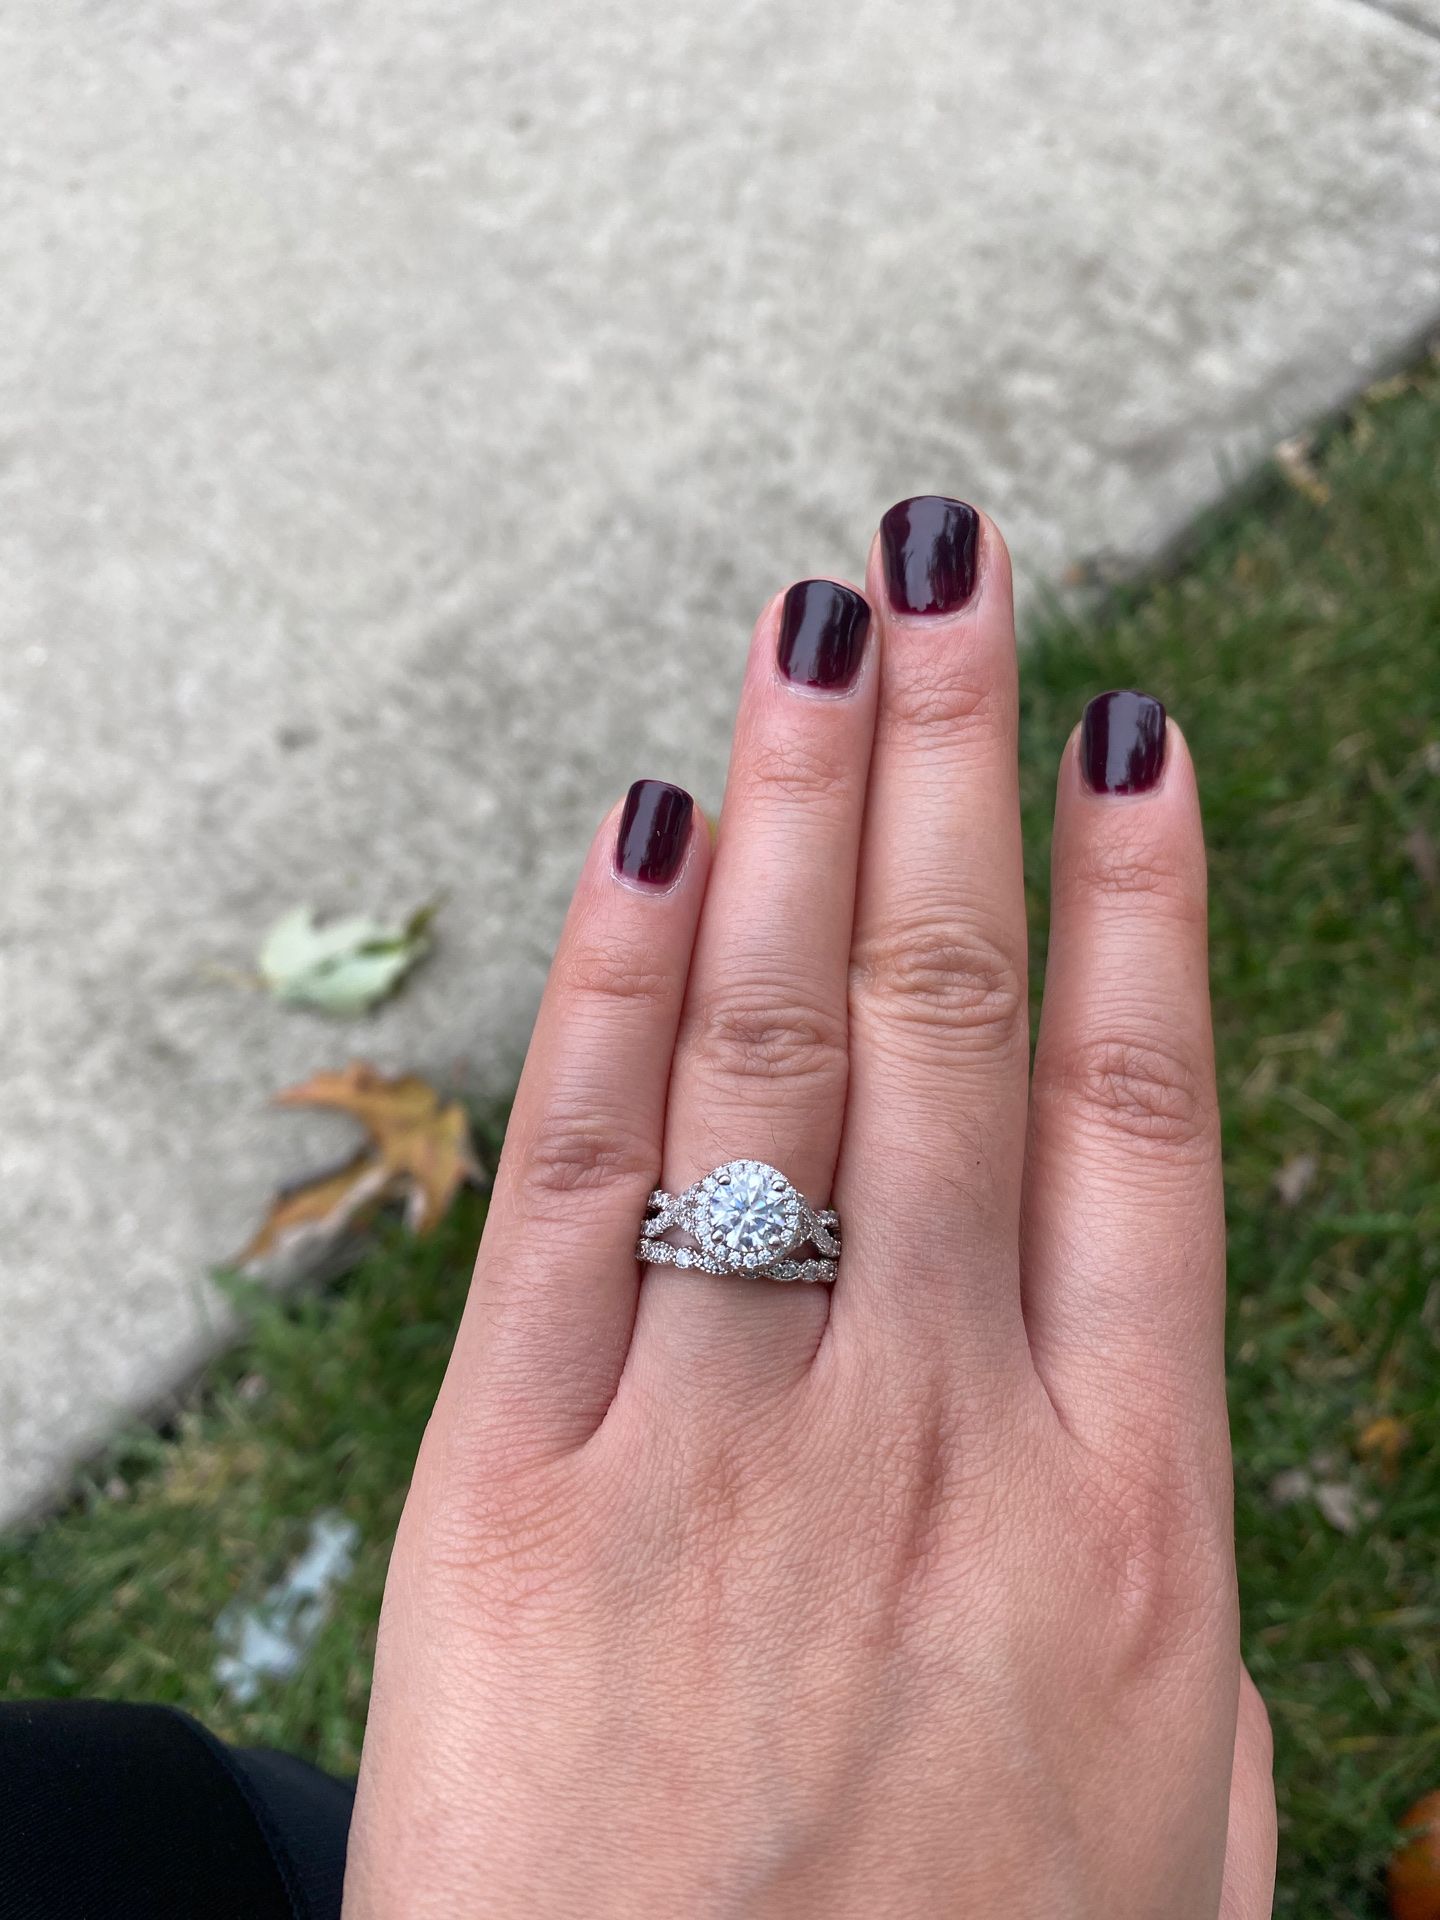 Engagement ring size 5